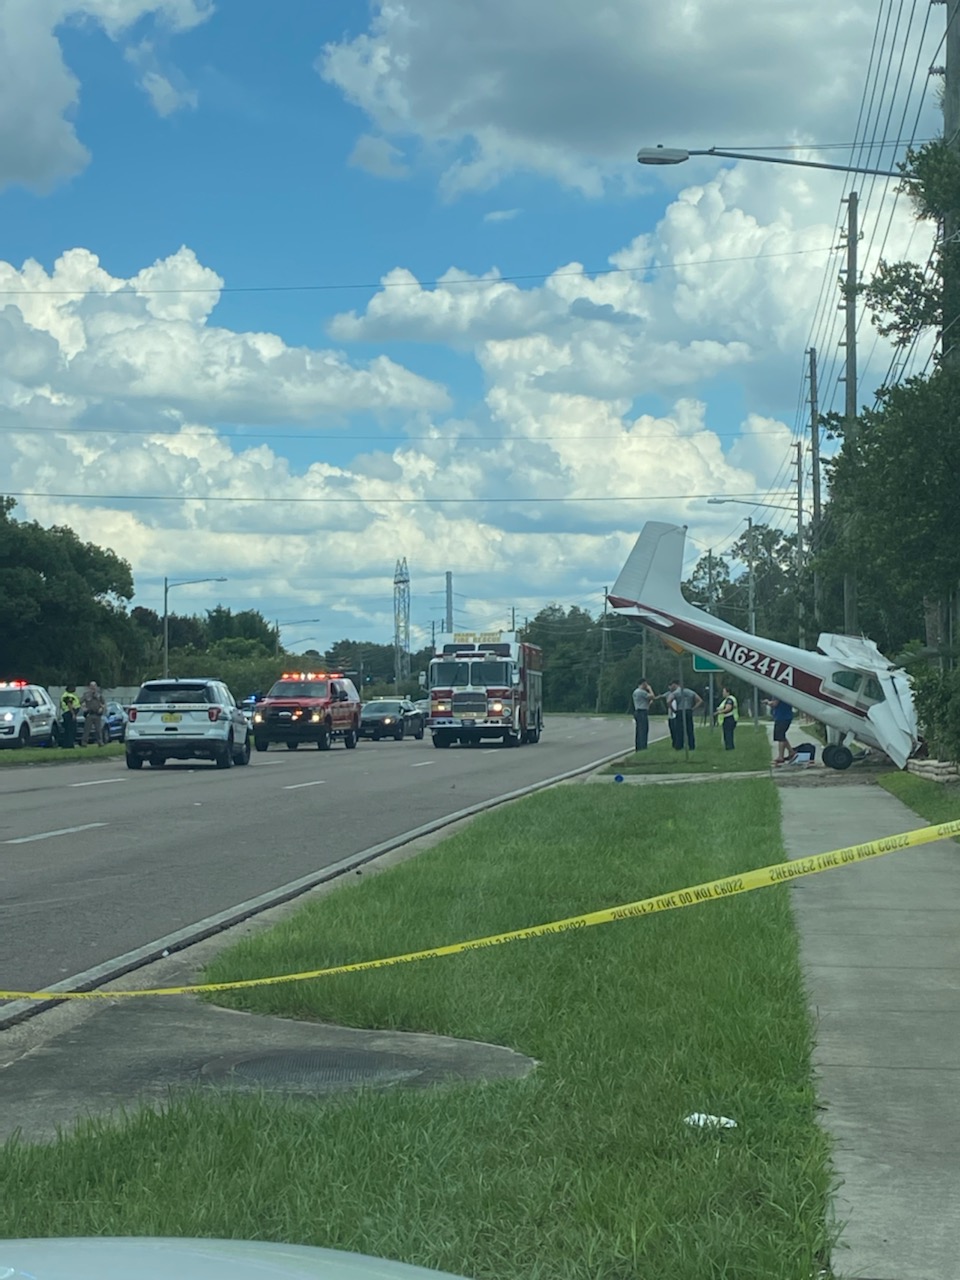 Plane has a breakdown and pilot needs to make an emergency landing in the middle of the avenue - Disclosure / OC Fire Rescue / ND